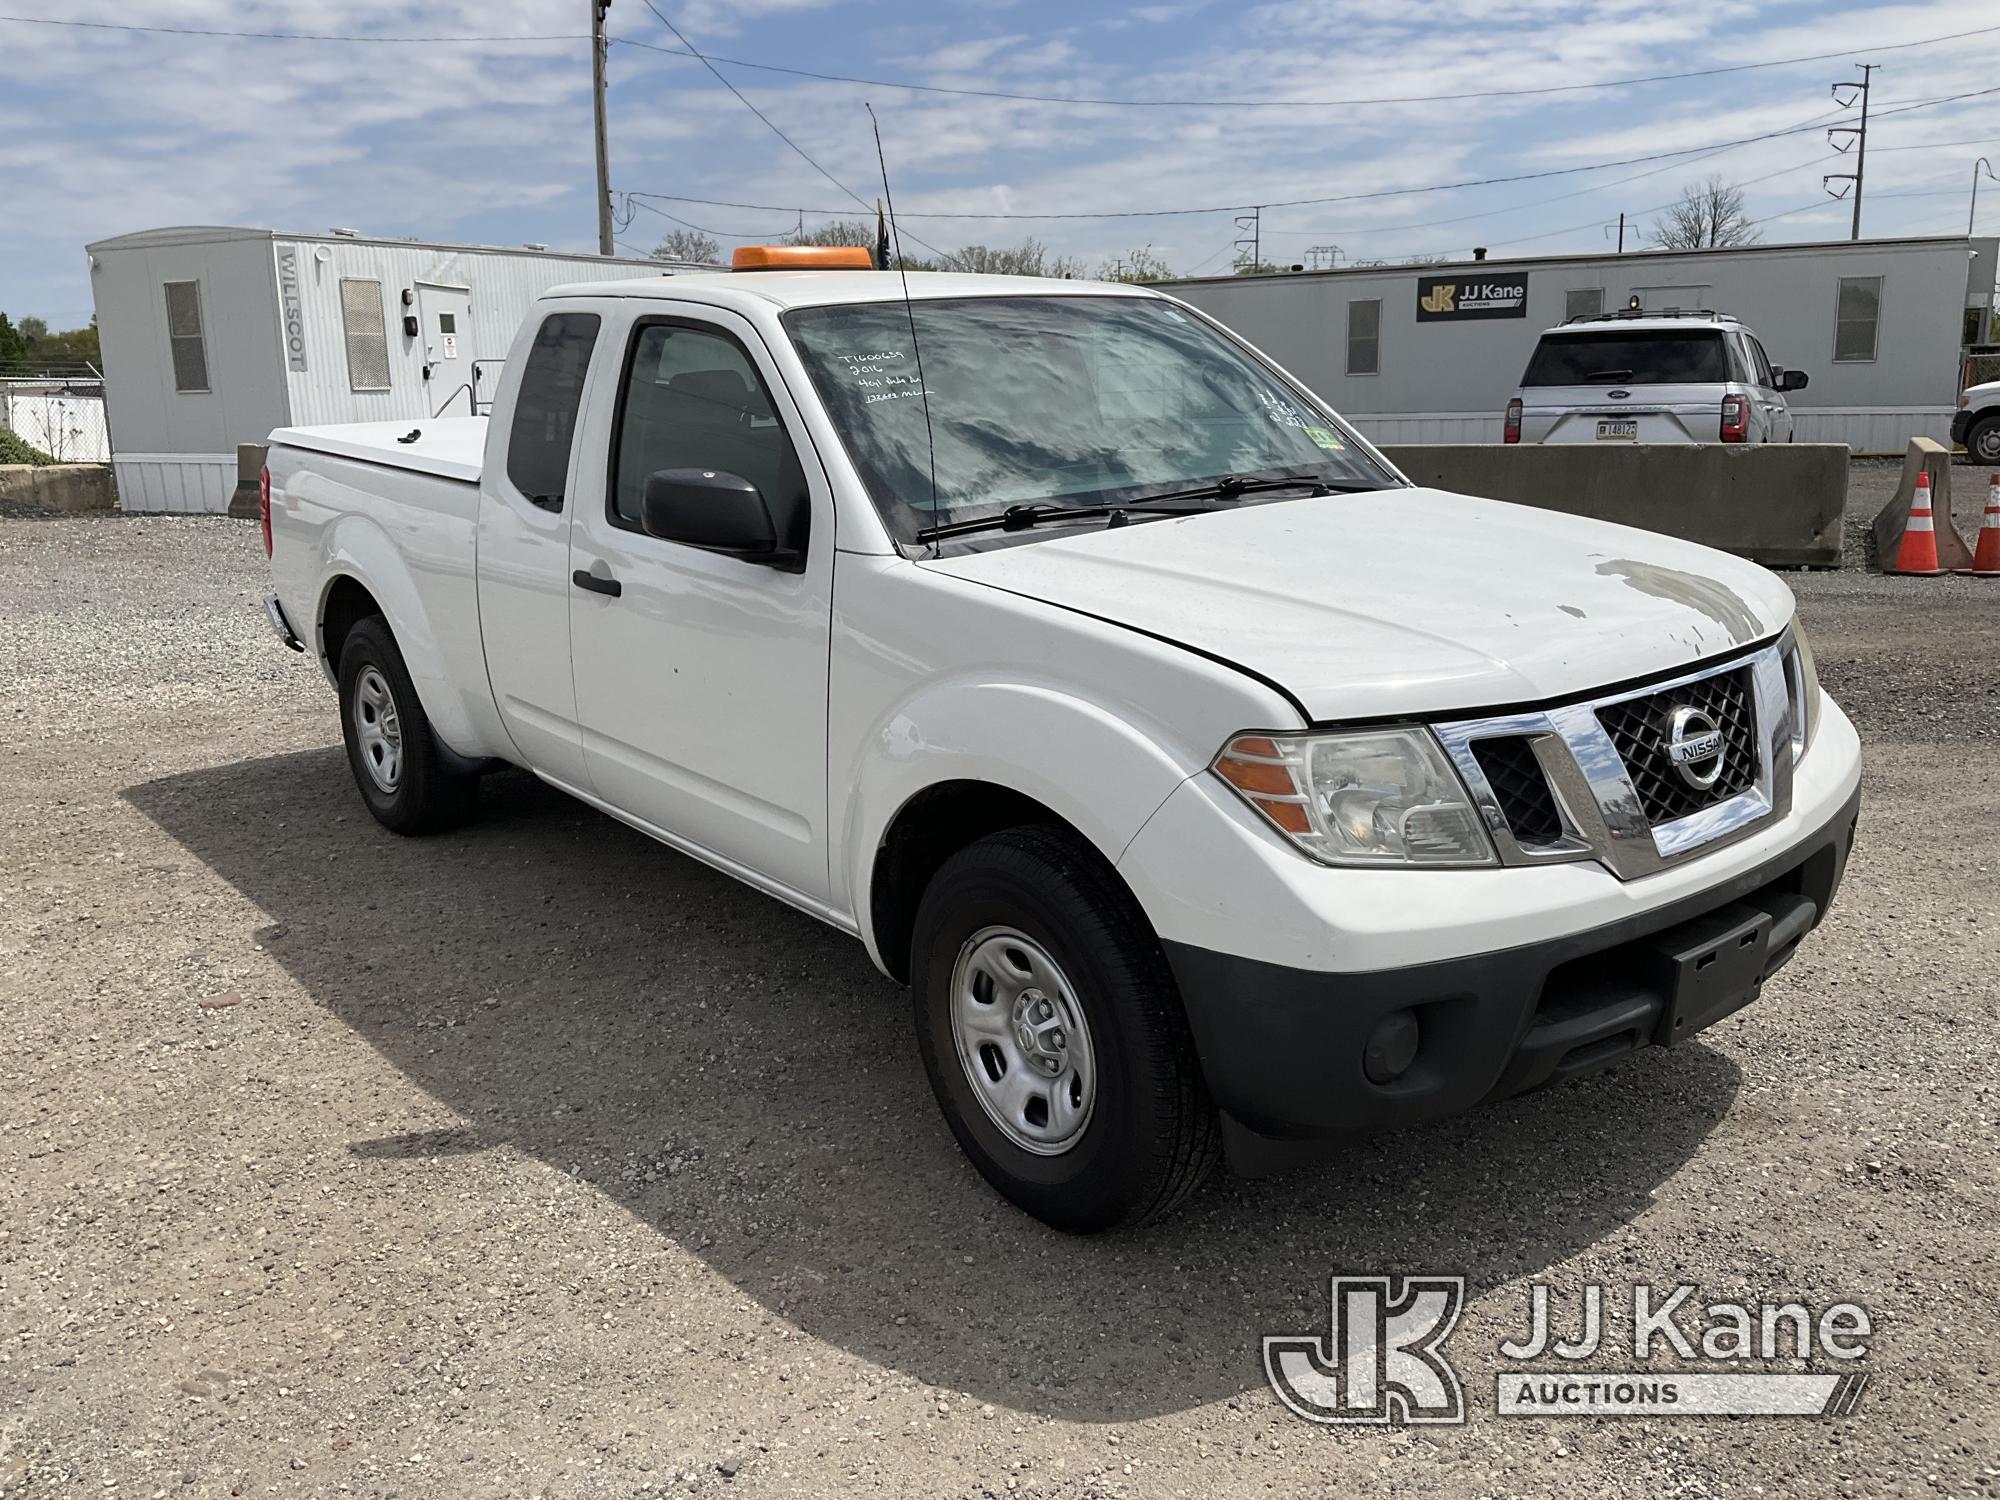 (Plymouth Meeting, PA) 2016 Nissan Frontier Extended-Cab Pickup Truck Bad Engine, Runs & Moves, Body